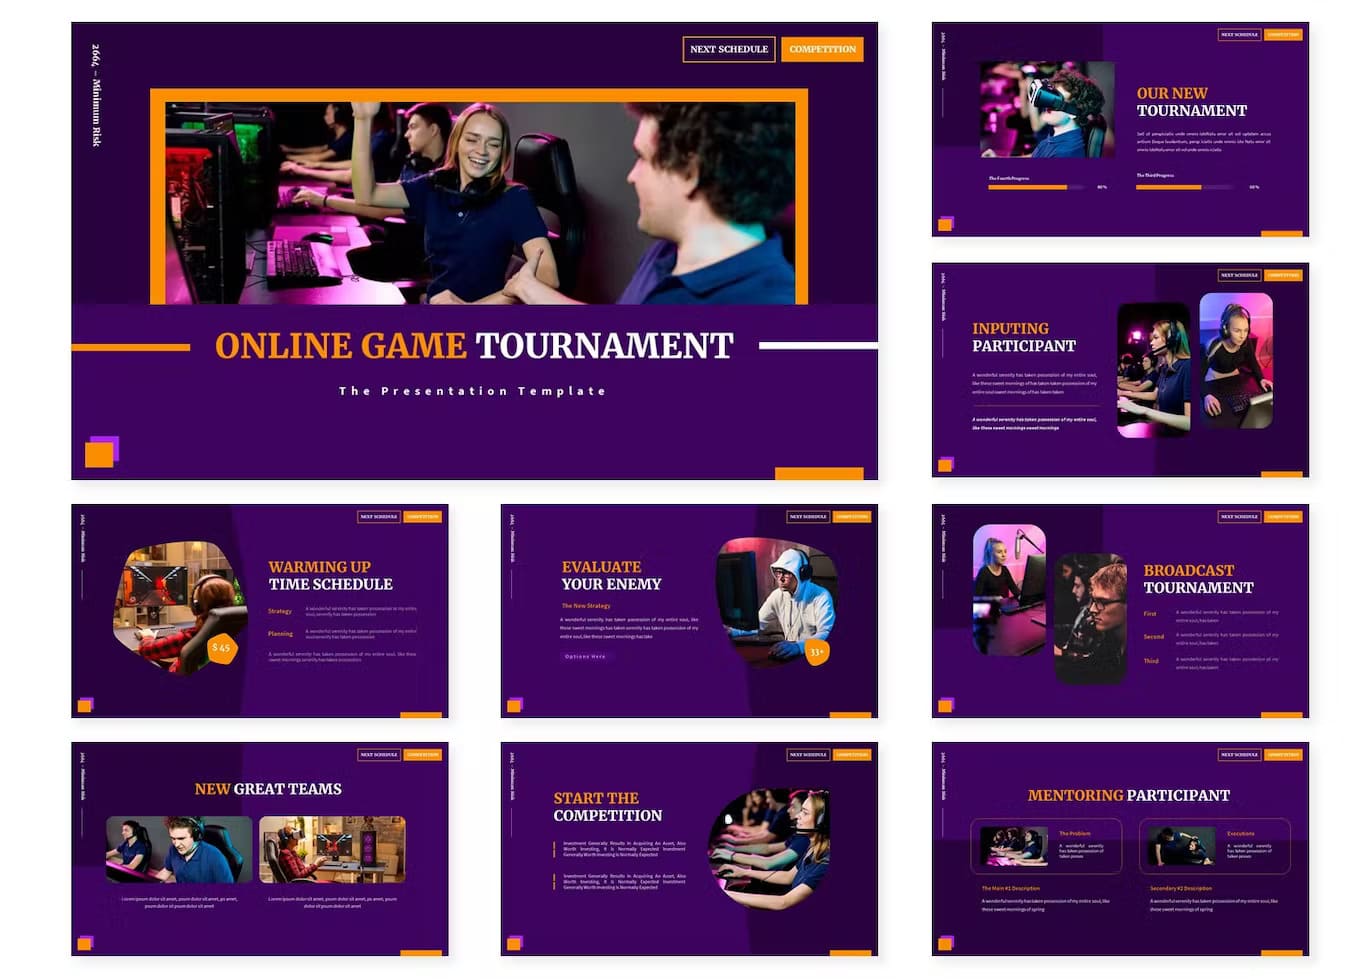 Warming up time schedule of Online Game Tournament | Google Slides Template.